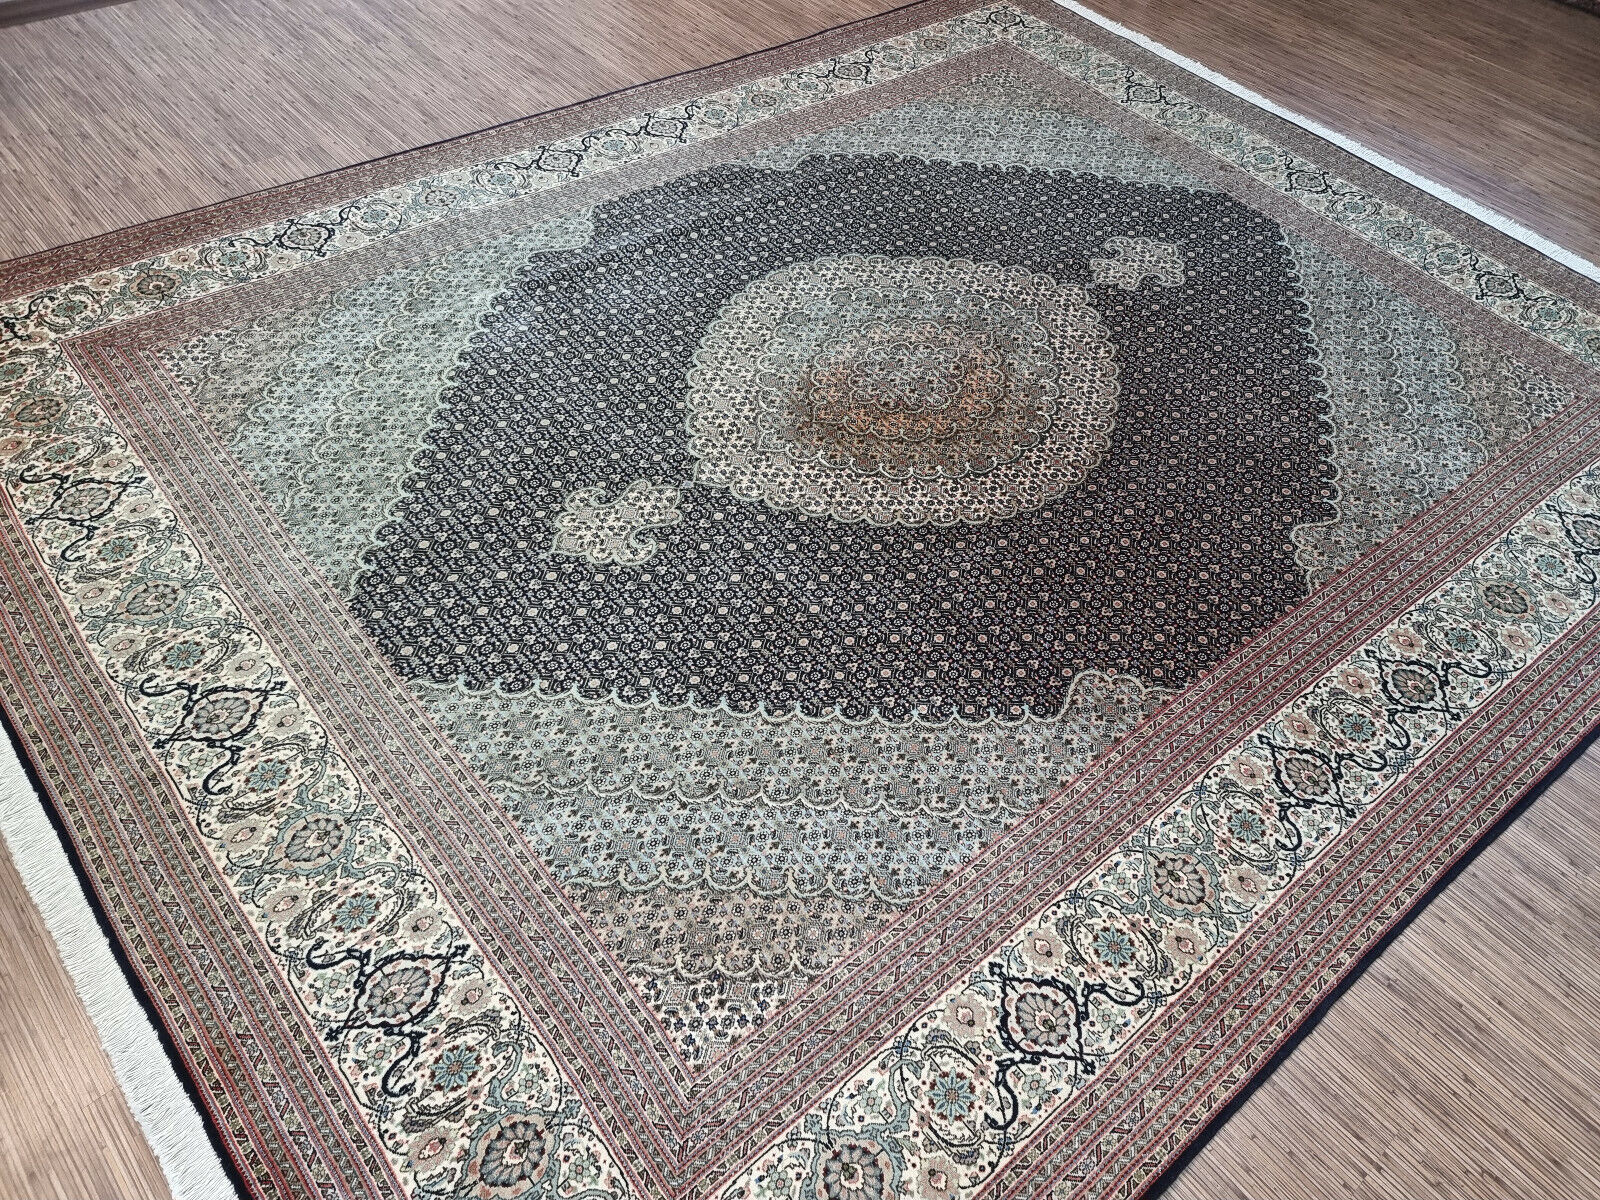  Front view of the Persian Tabriz rug enhancing the elegance of a living room